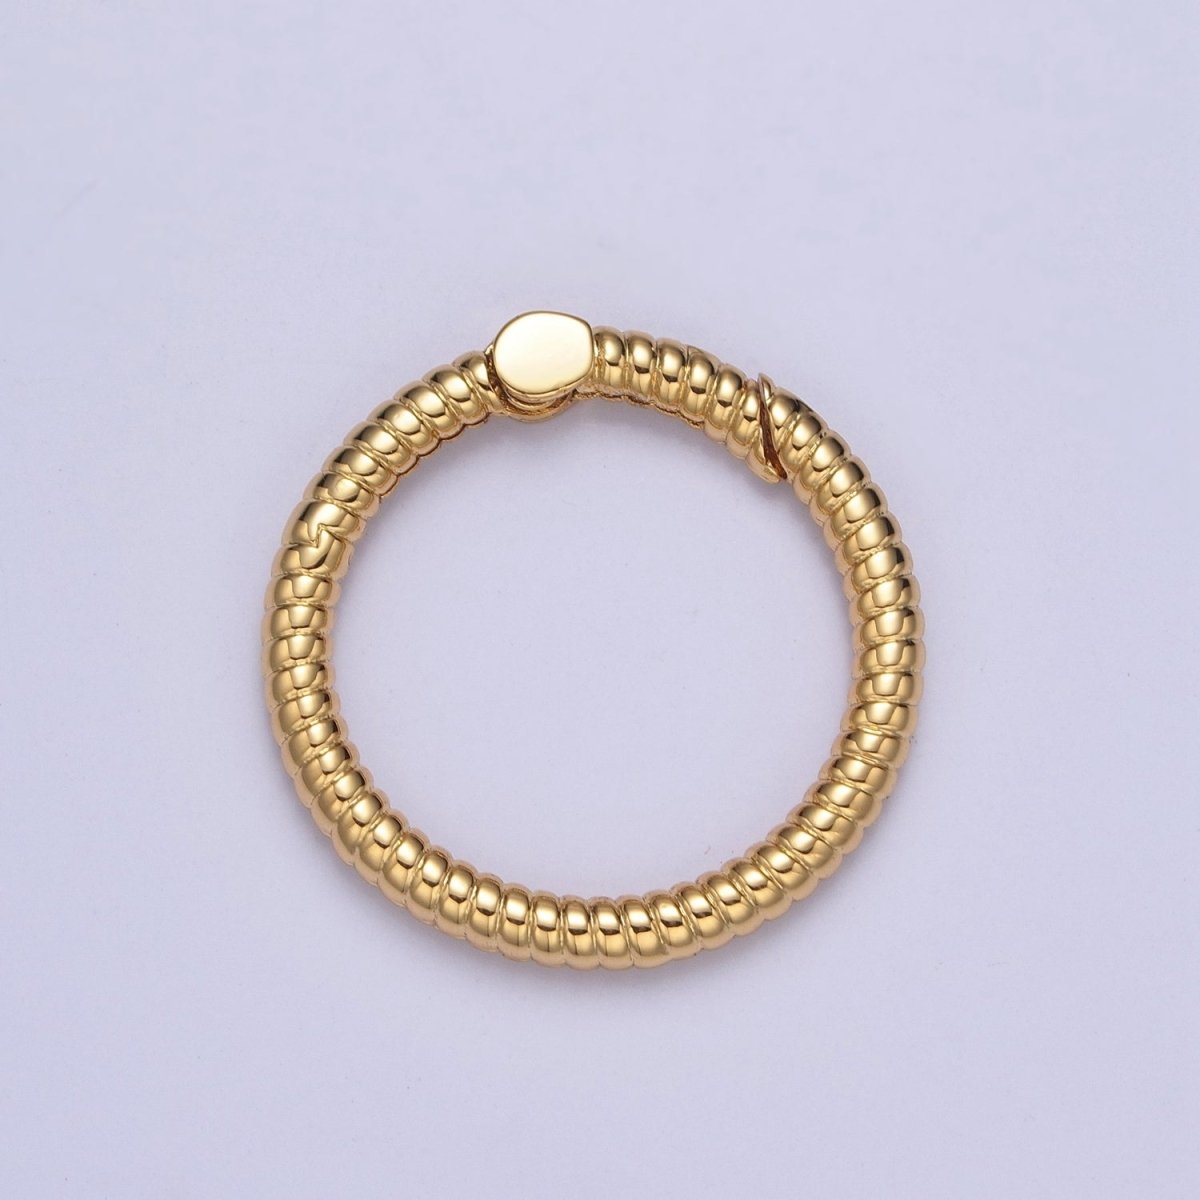 Dainty Gold Round Spring Gate Ring, Push Gate Clasp Charm Holder 14K Gold Filled Clasp for Charm Holder Connector L-729 L-730 - DLUXCA